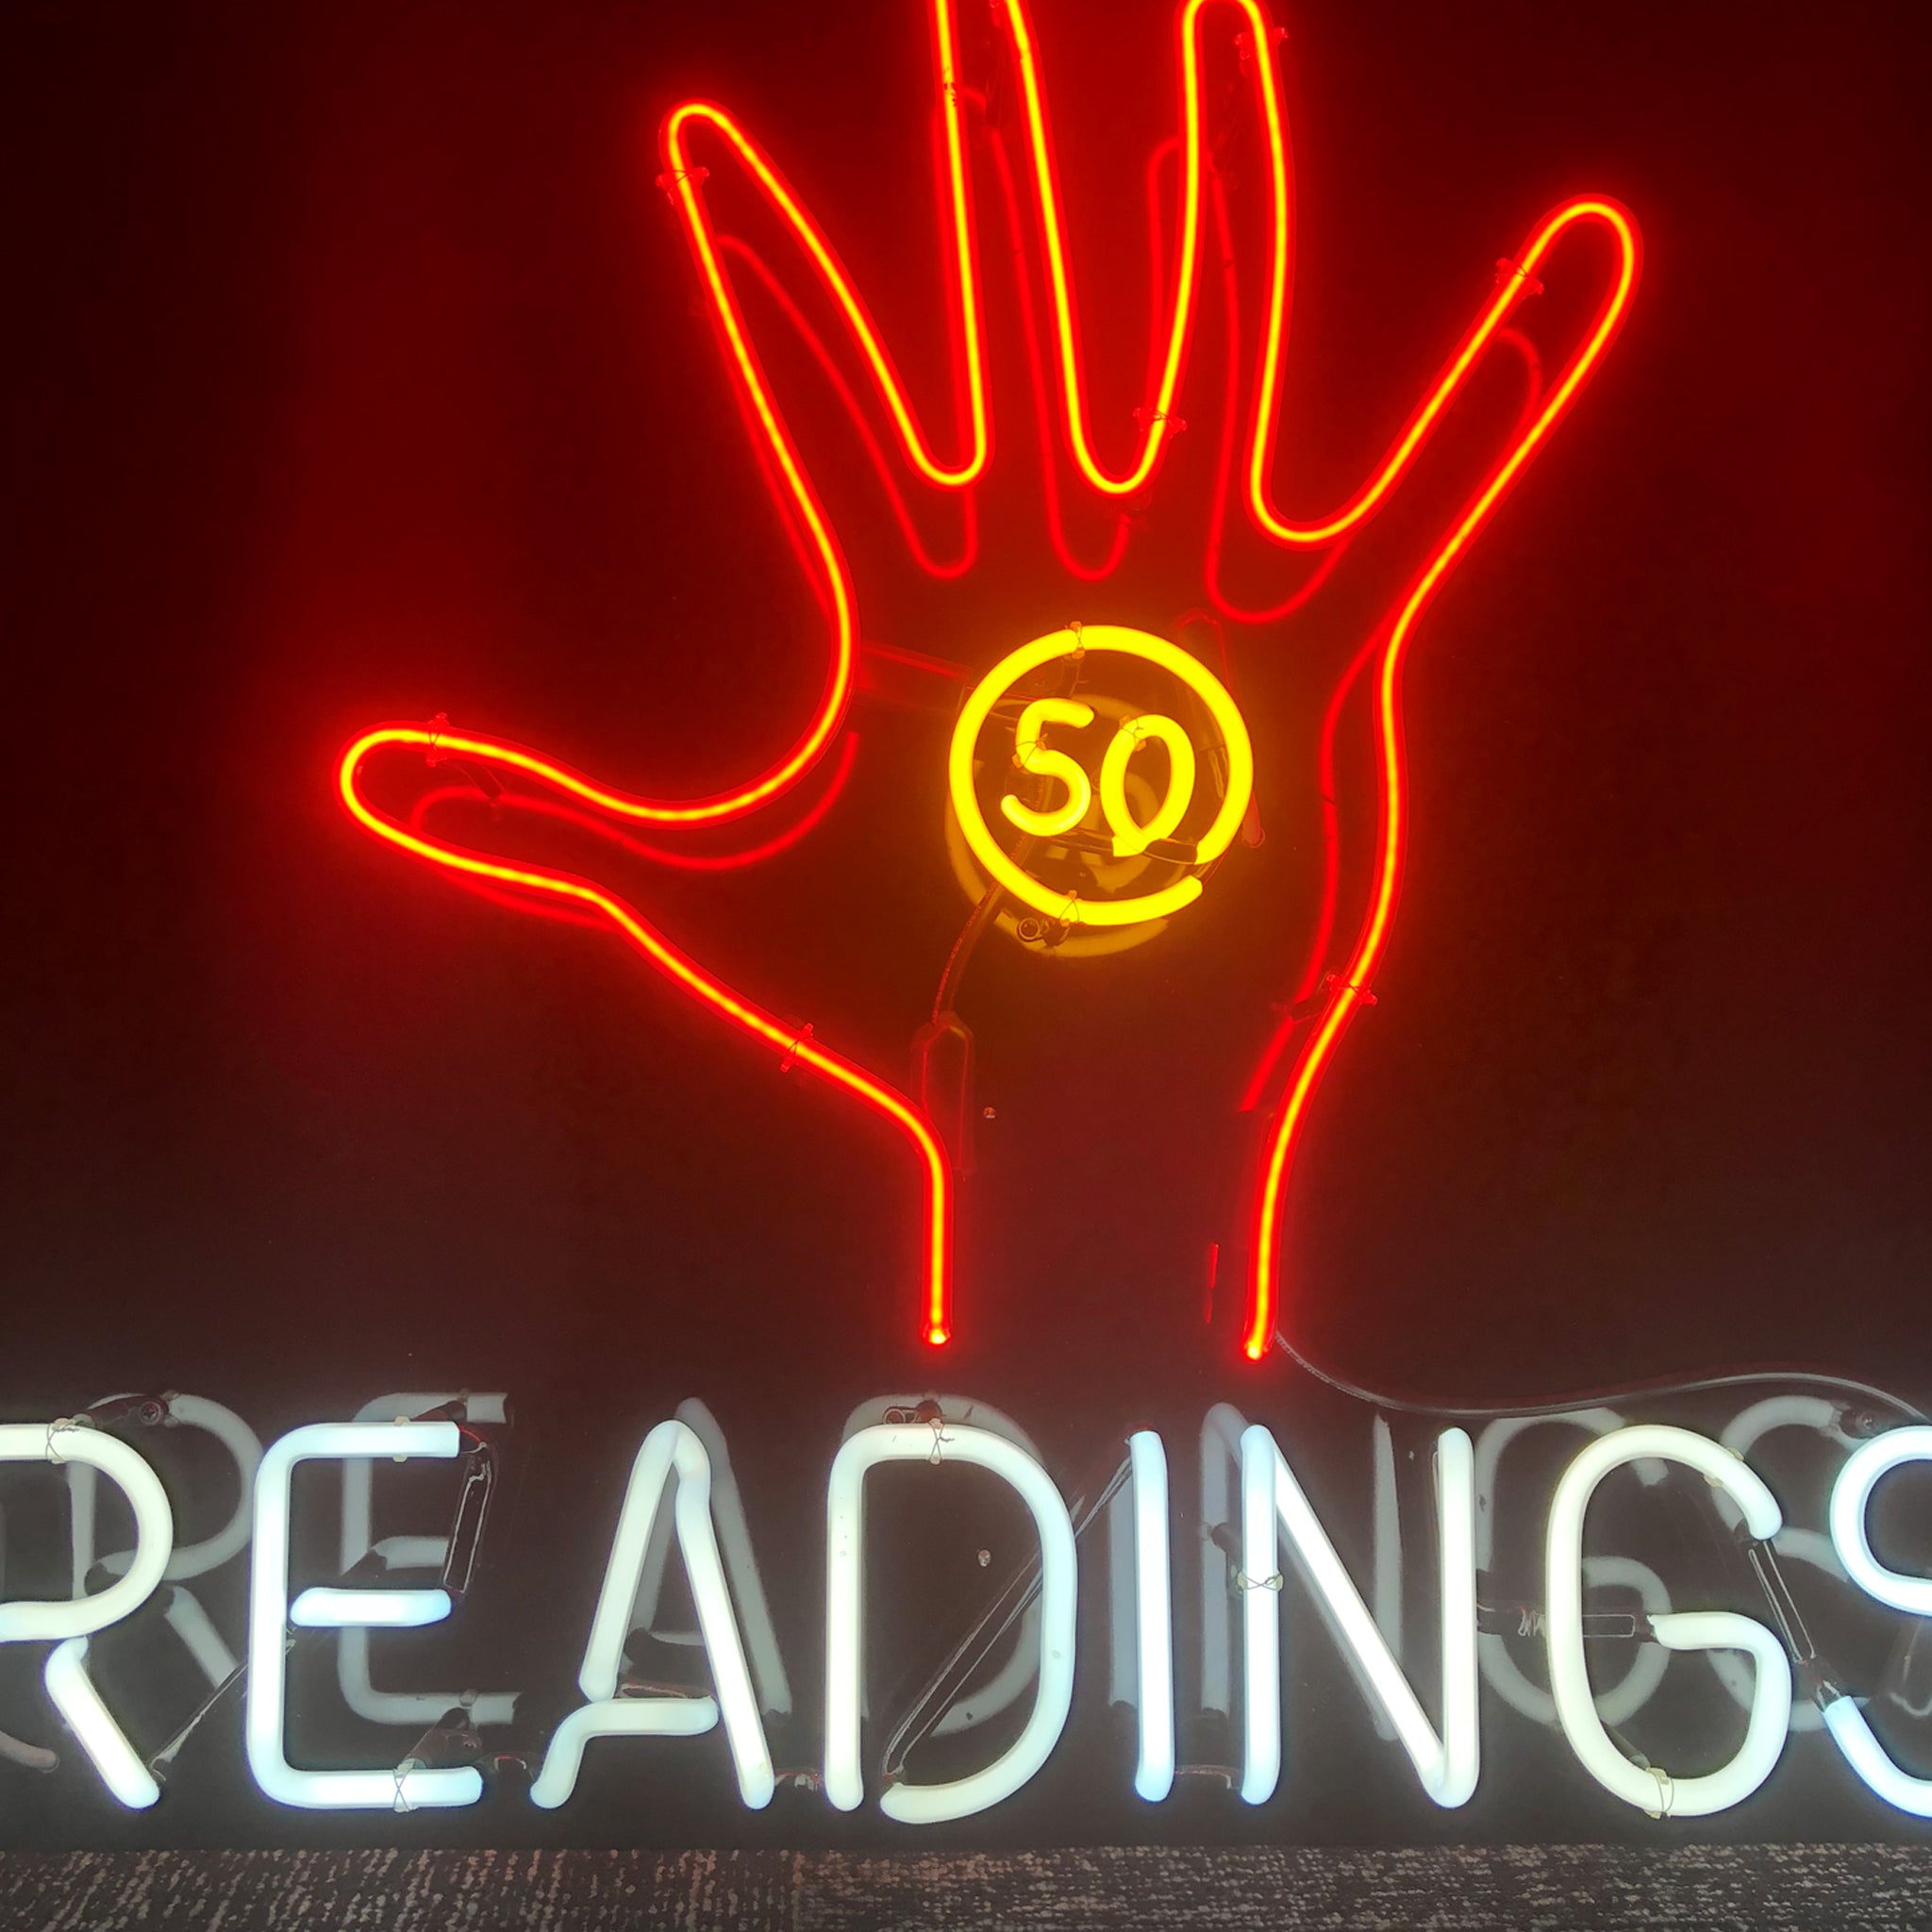 Palm Readings Neon Sign